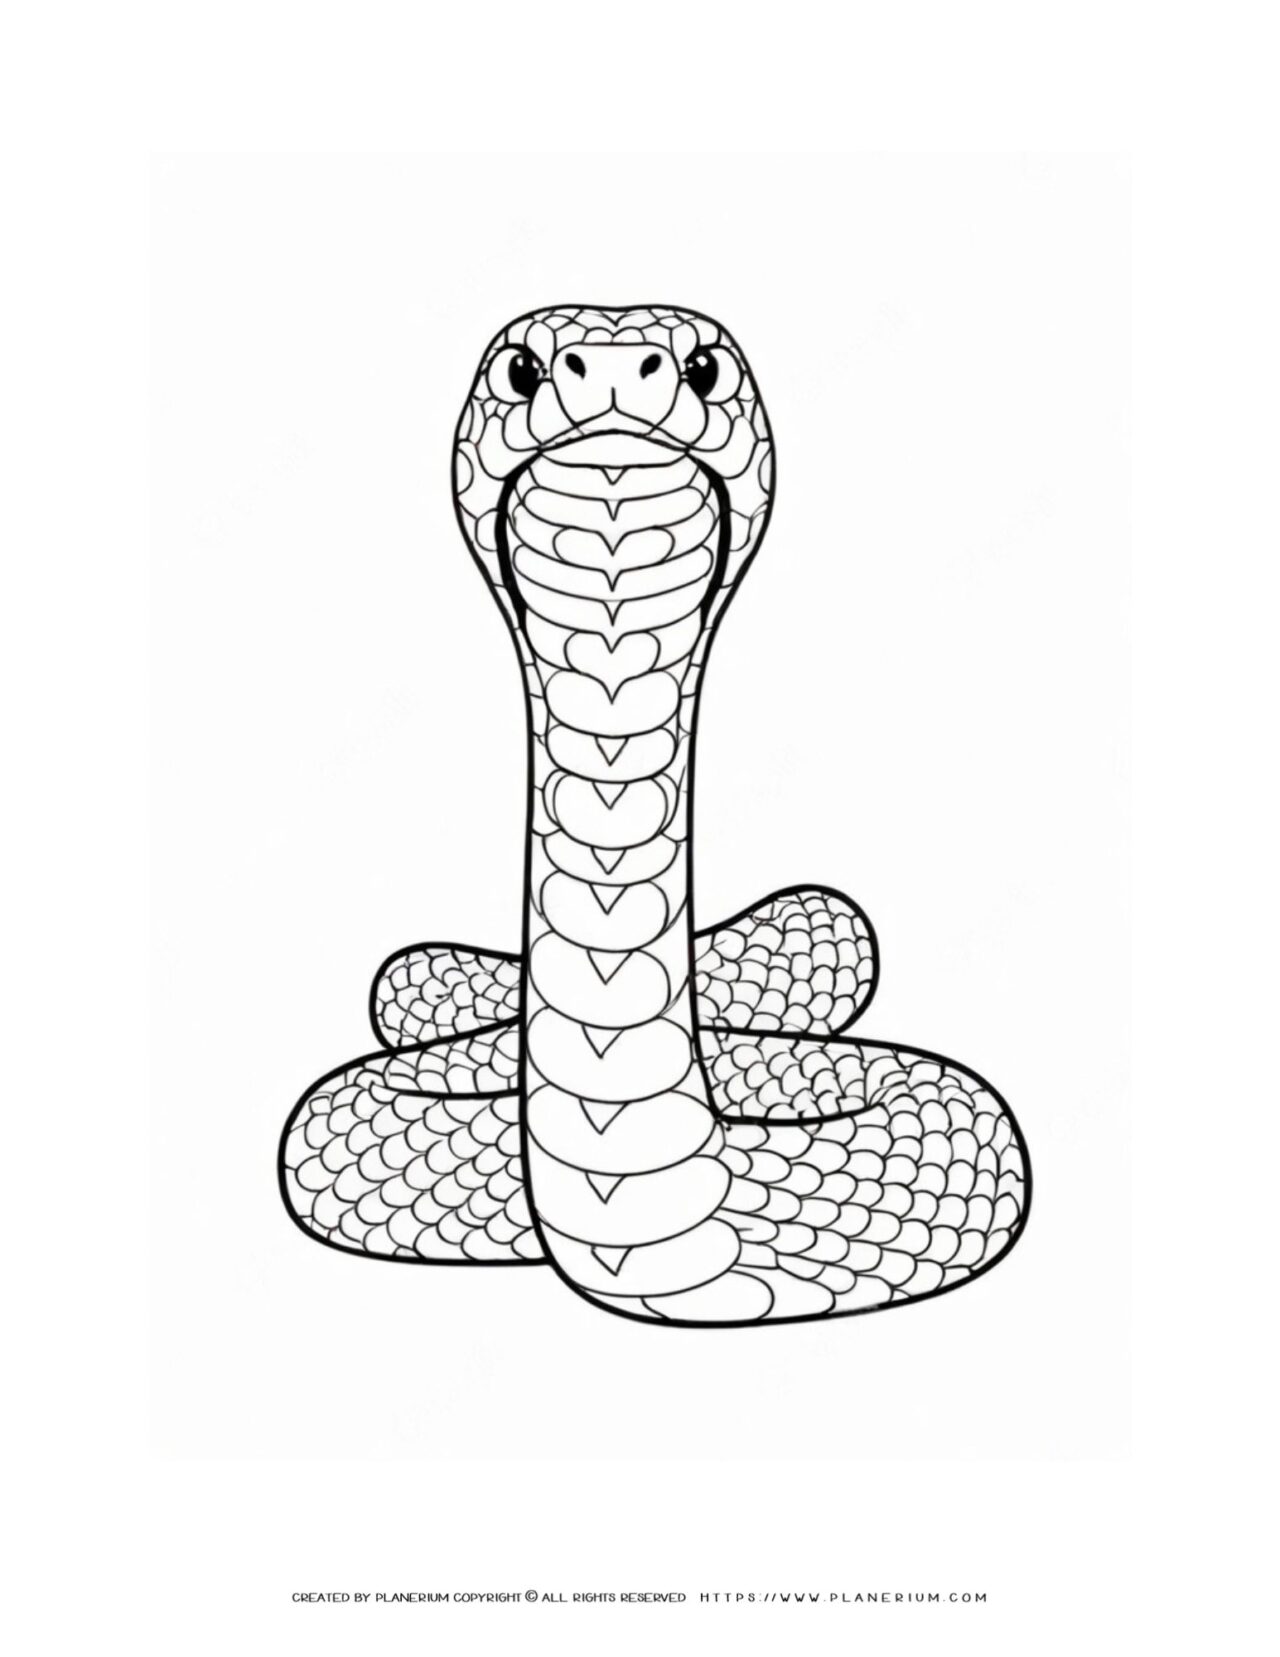 Detailed-Snake-Outline-Animal-Coloring-Page-for-Kids